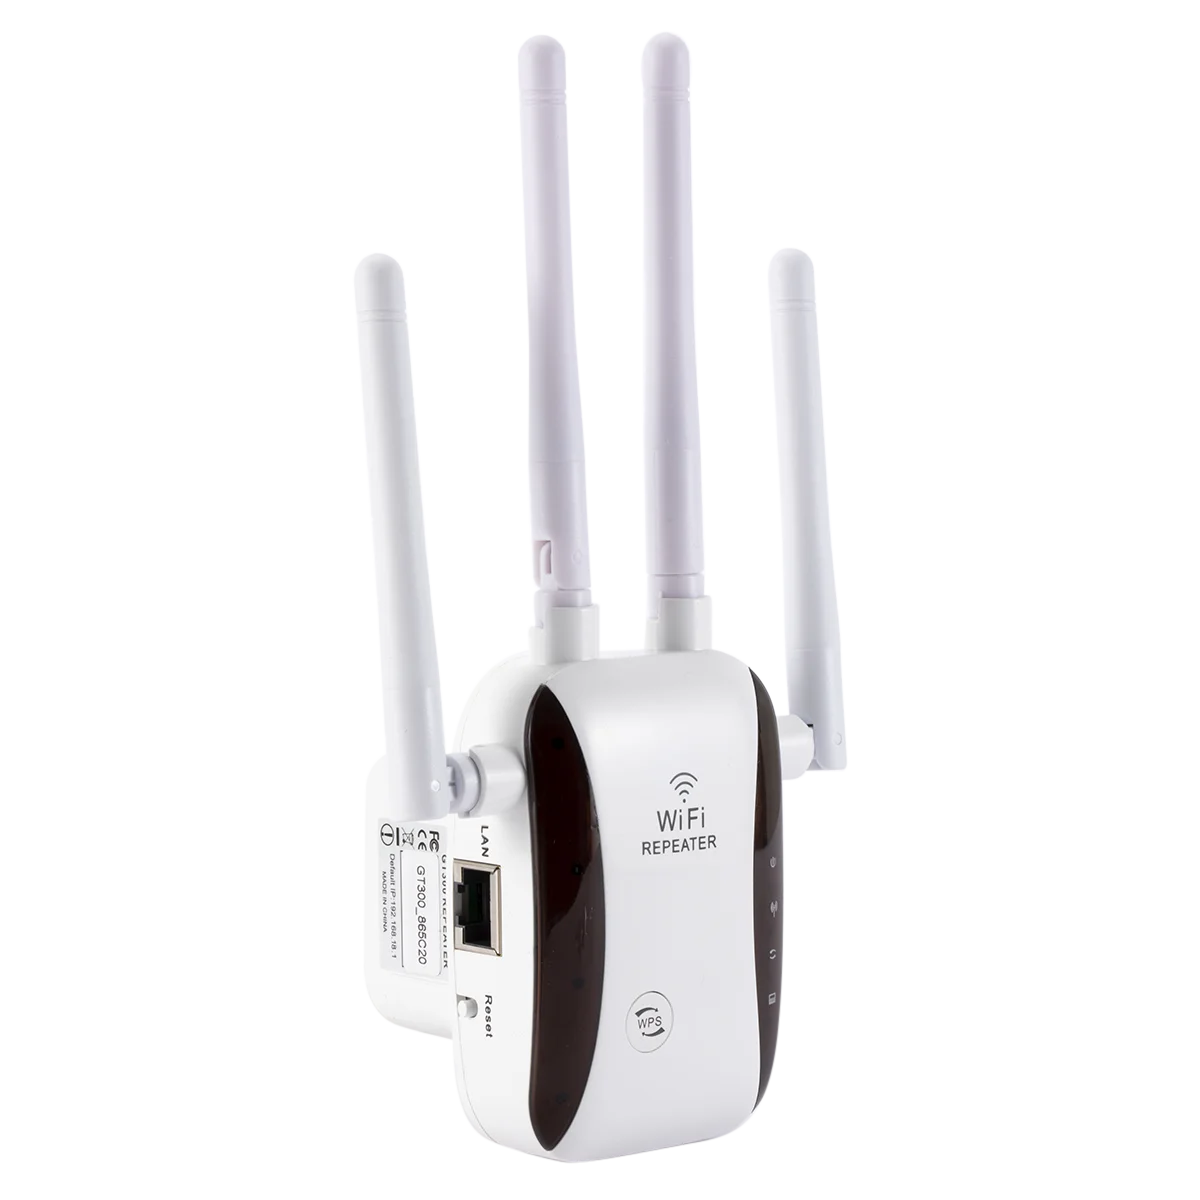 300Mbps 4 Antenna WiFi Range Extender Wireless Amplifier Repeater Router Booster 